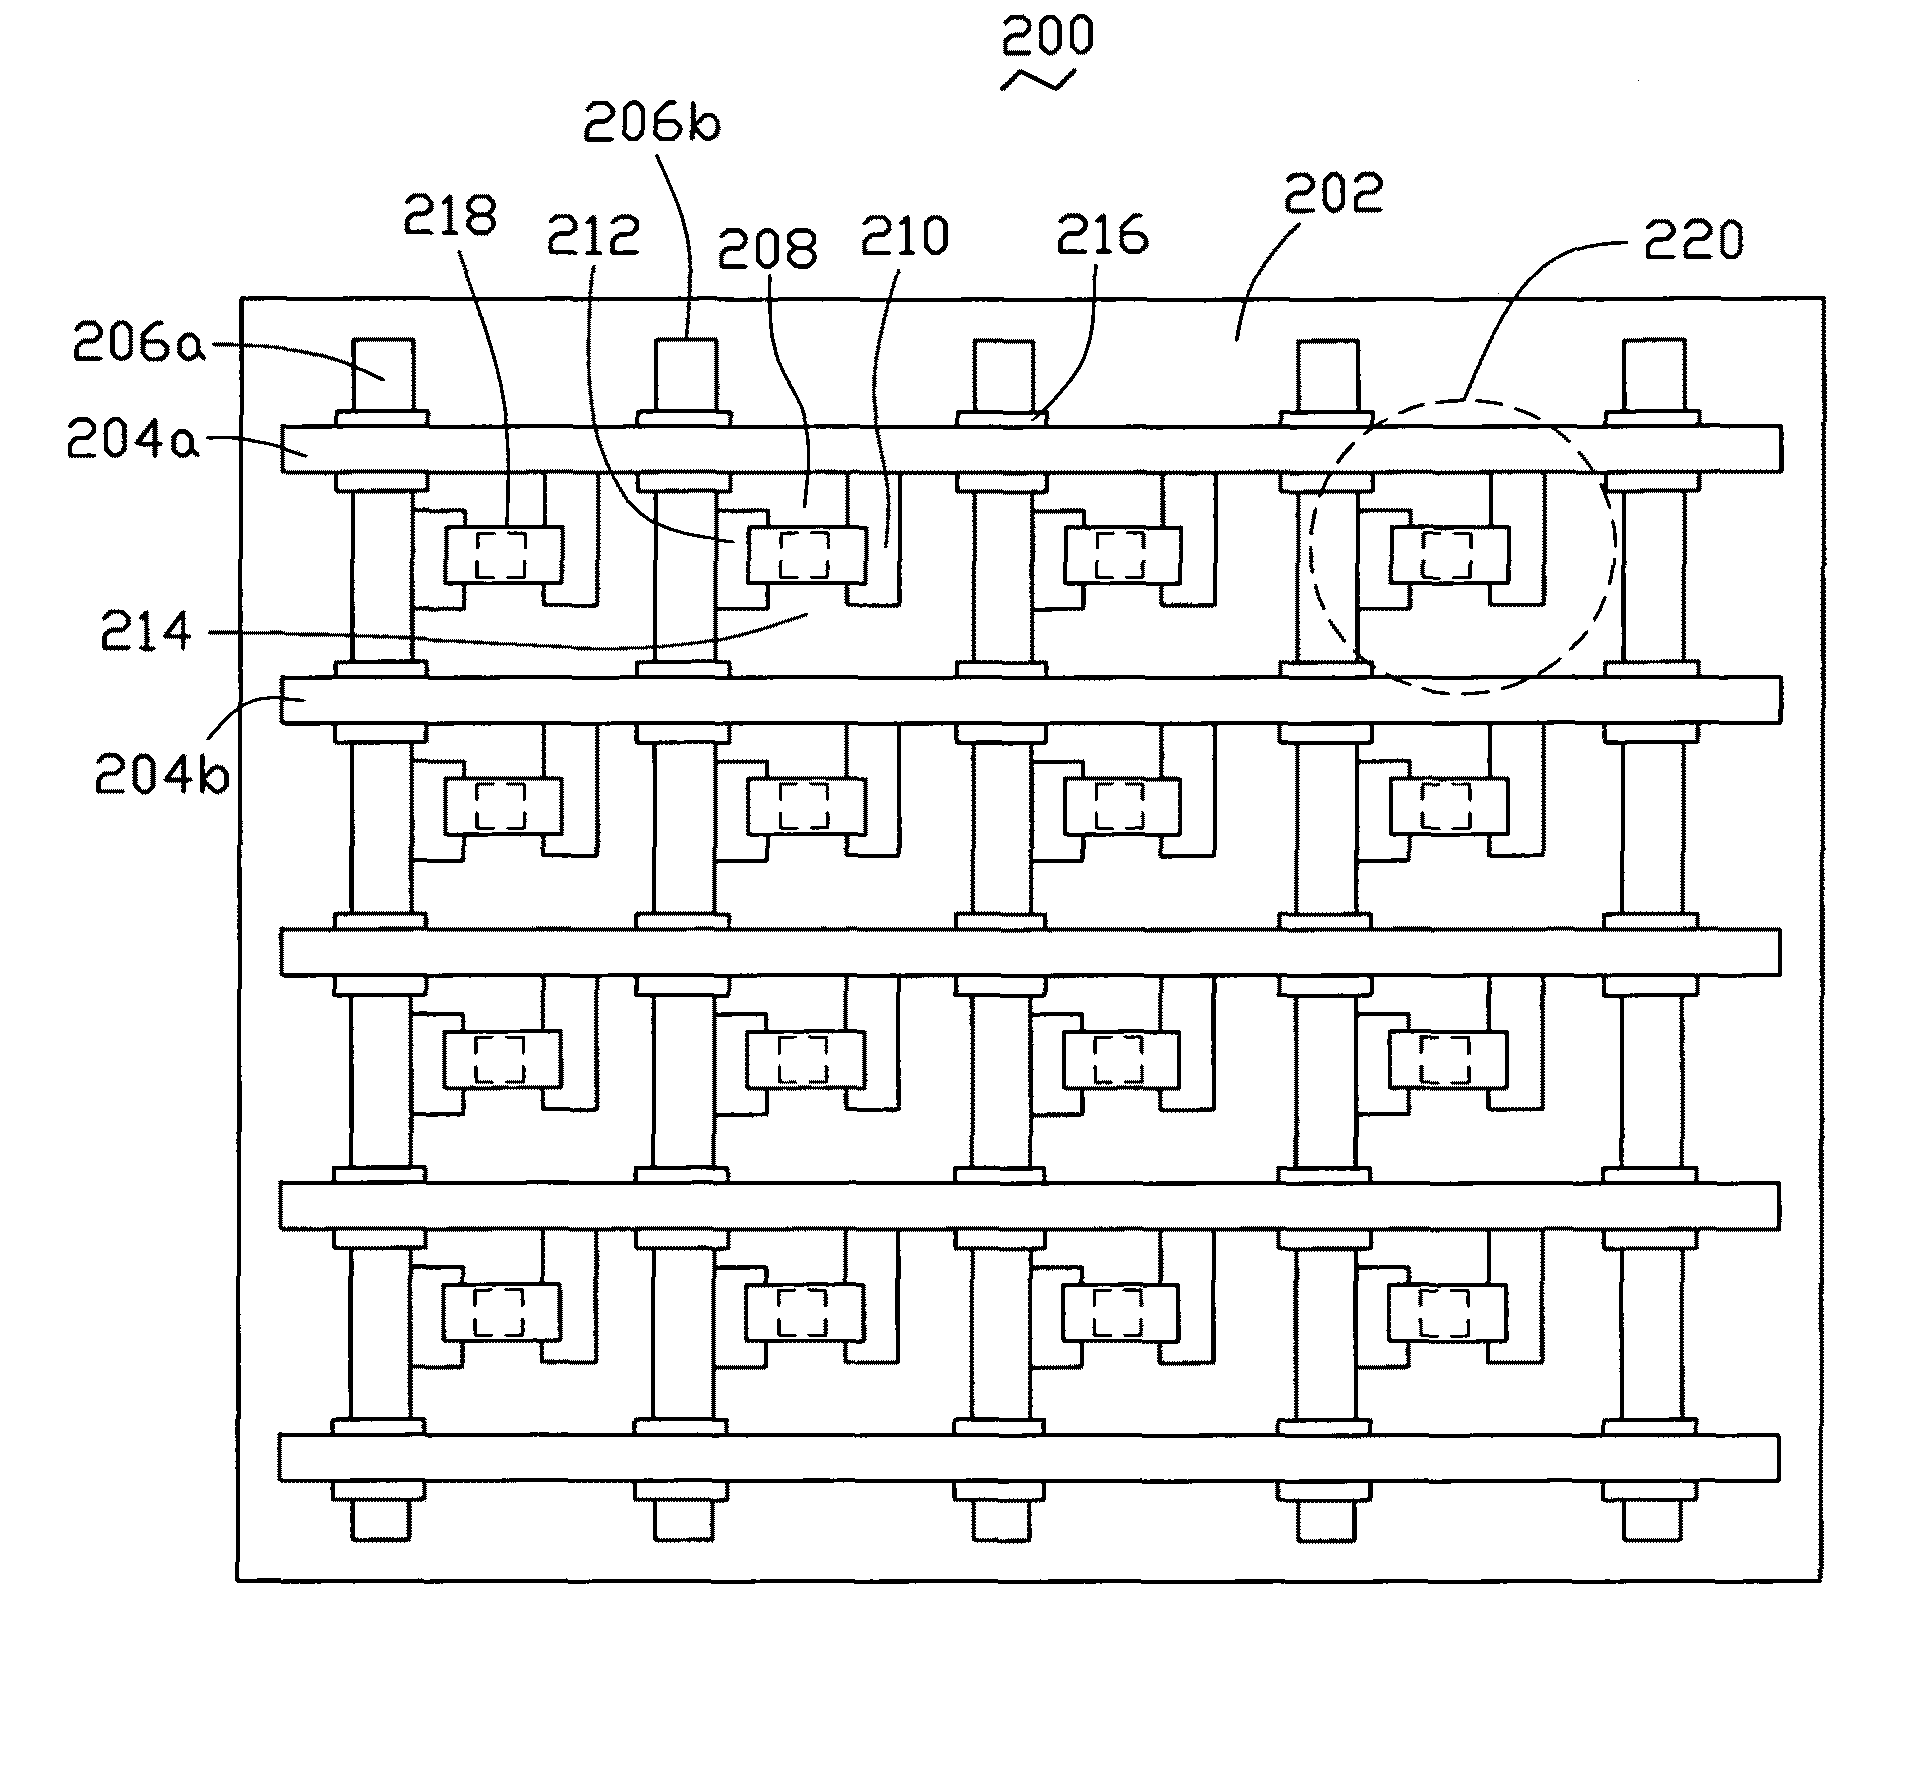 Thermionic electron emission device